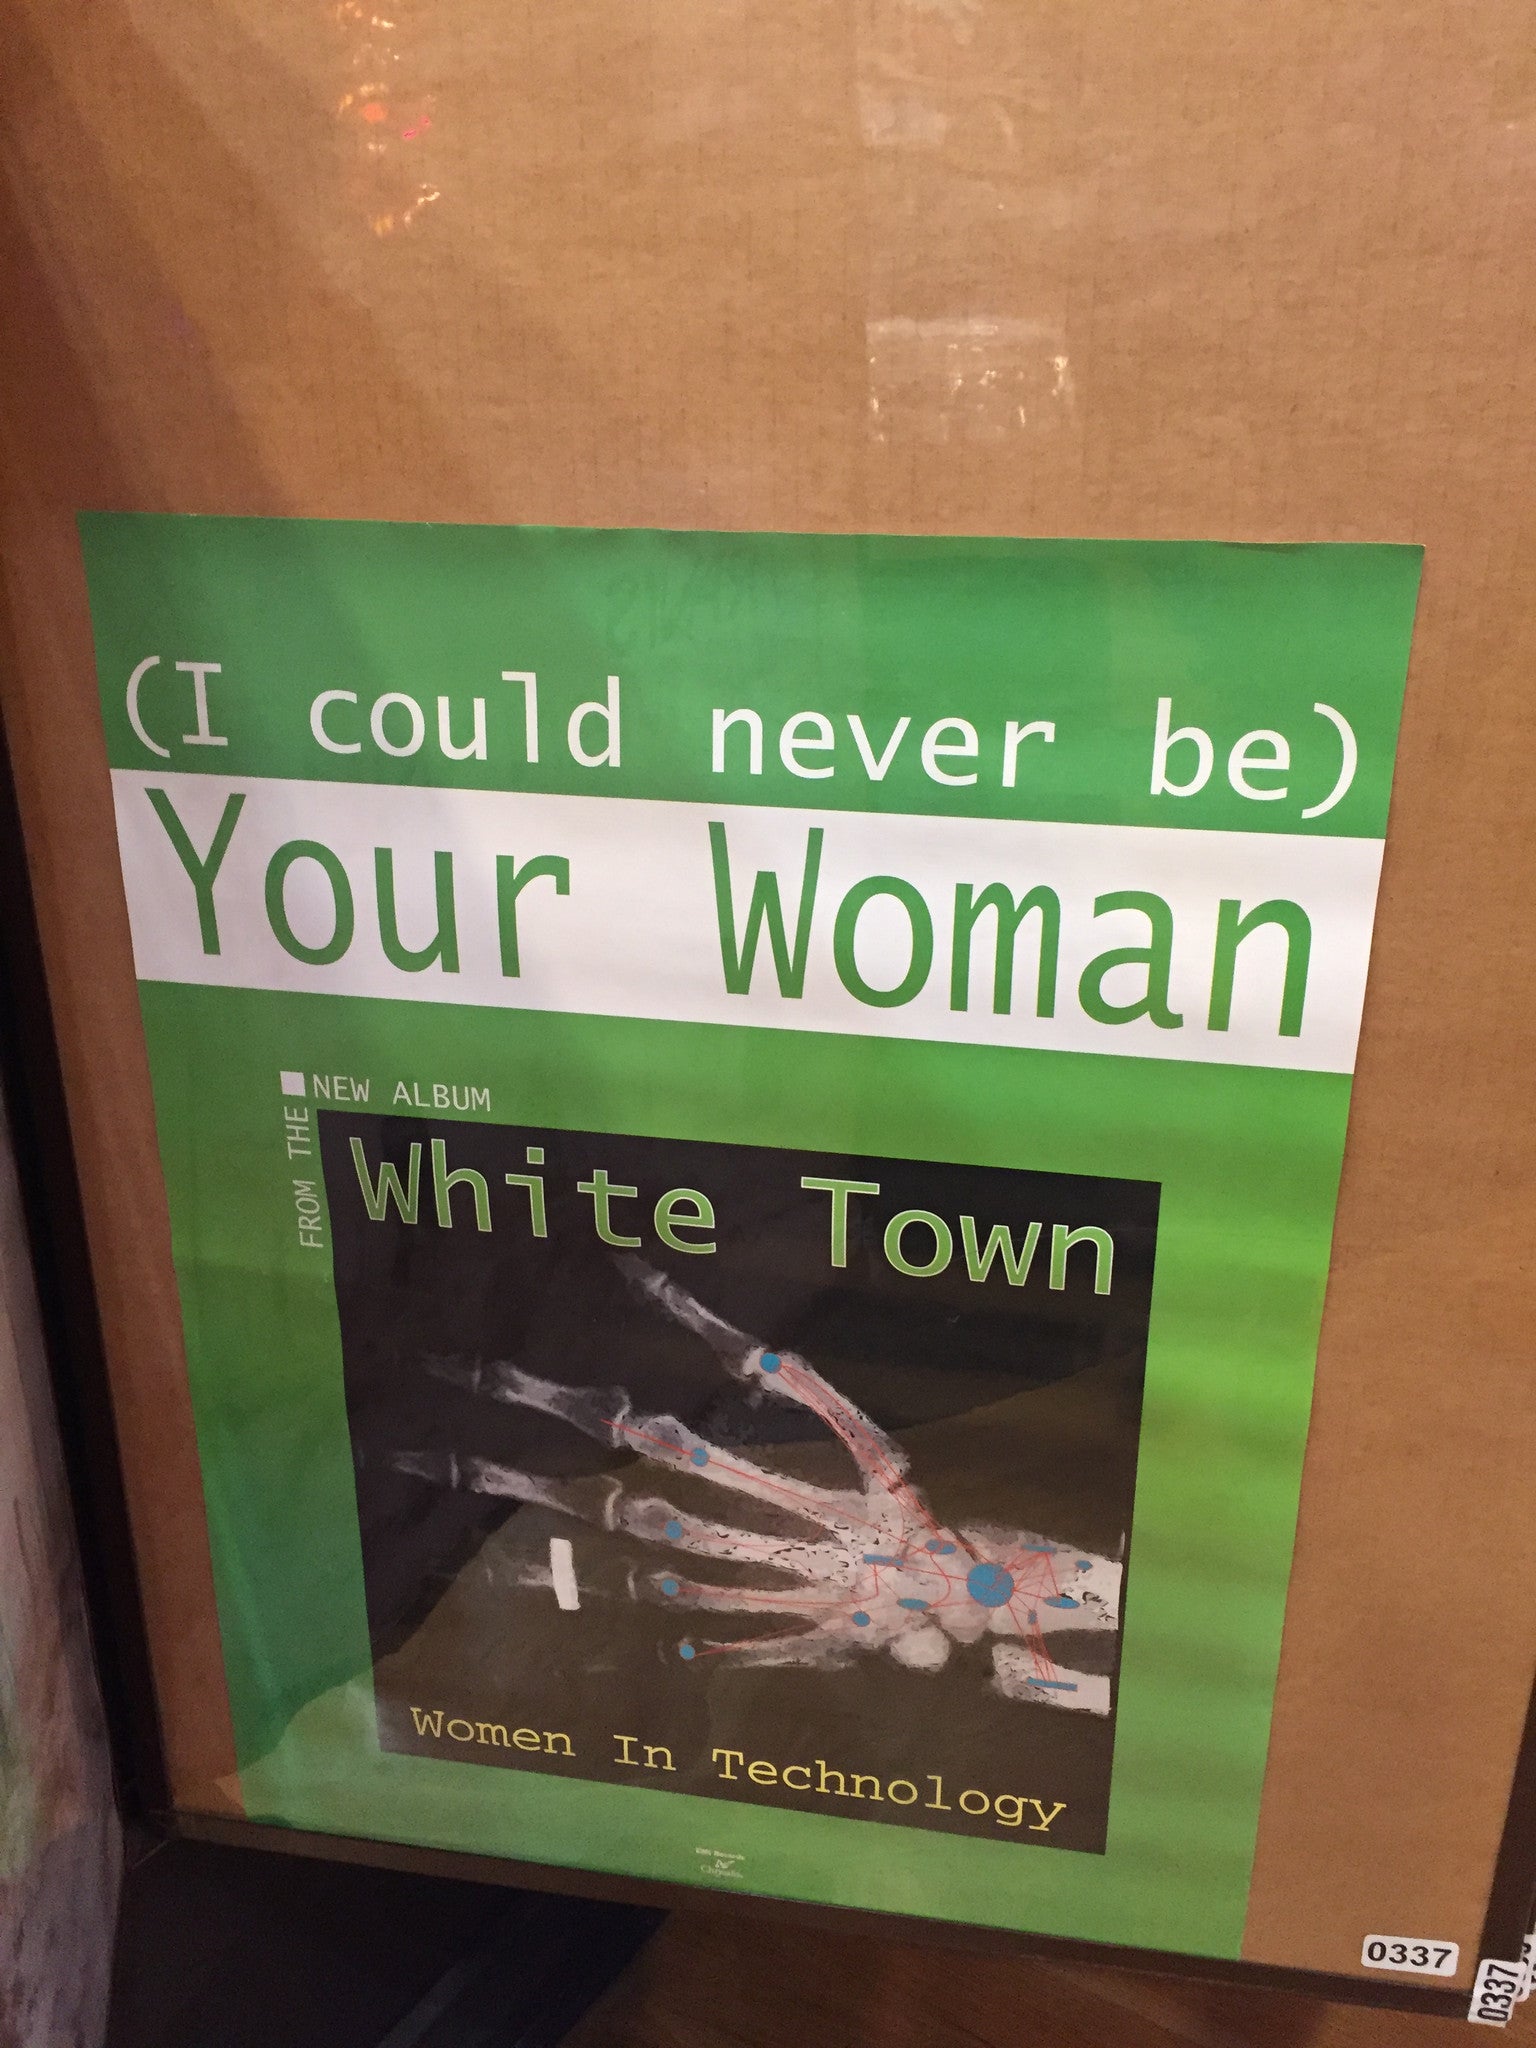 White Town – Women In Technology - 1997 - p0337